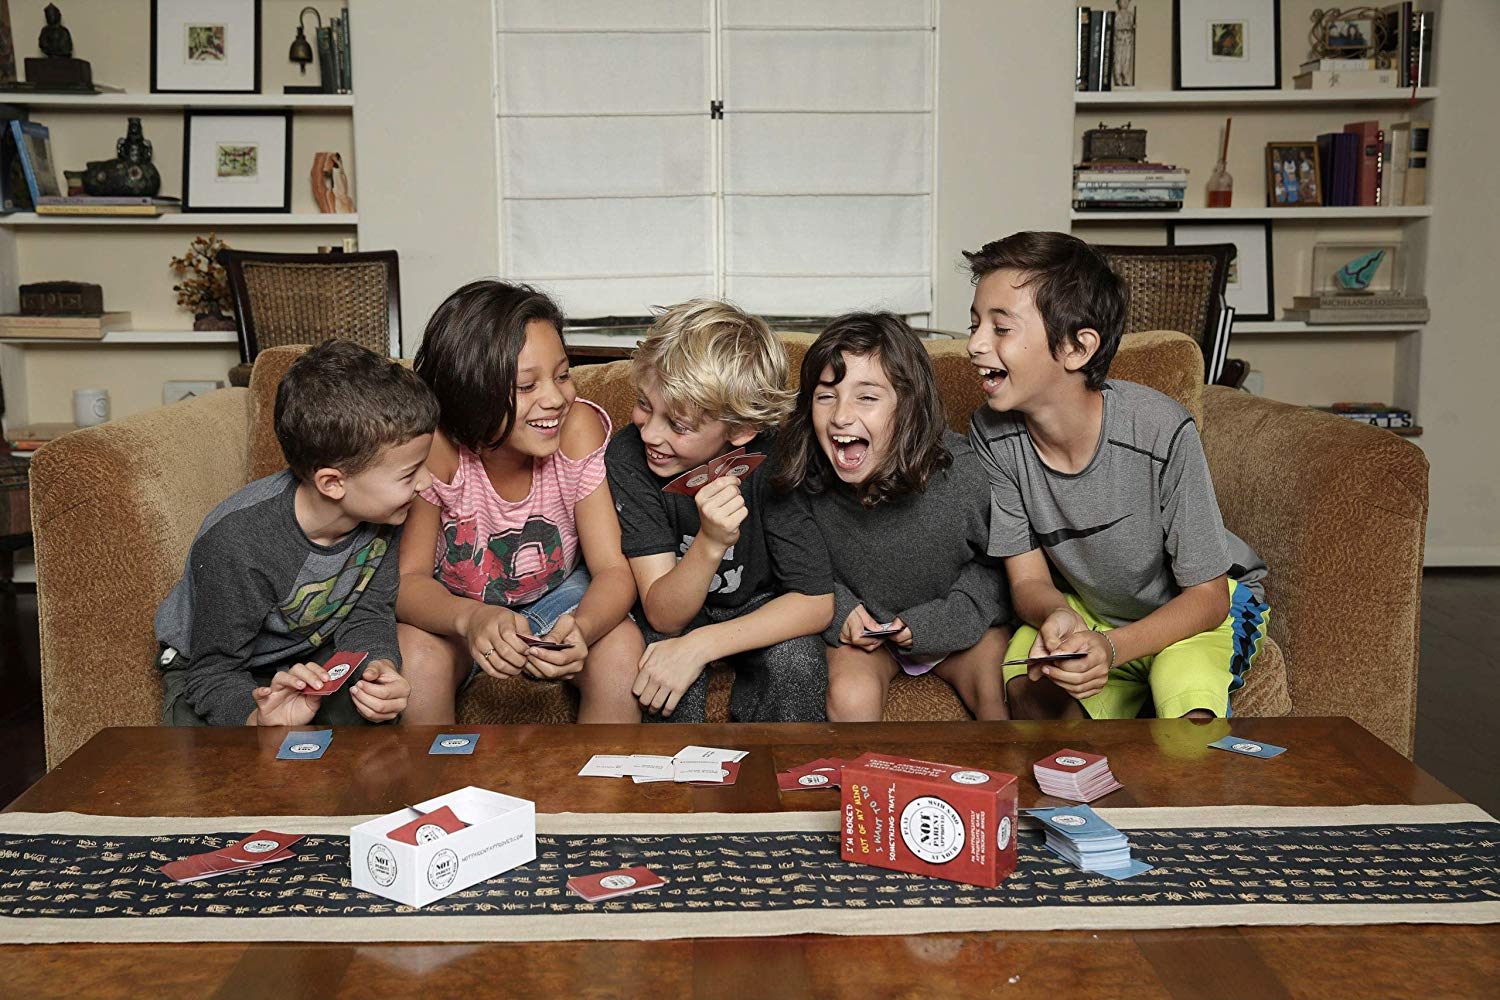 Not Parent Approved: A Card Game for Kids